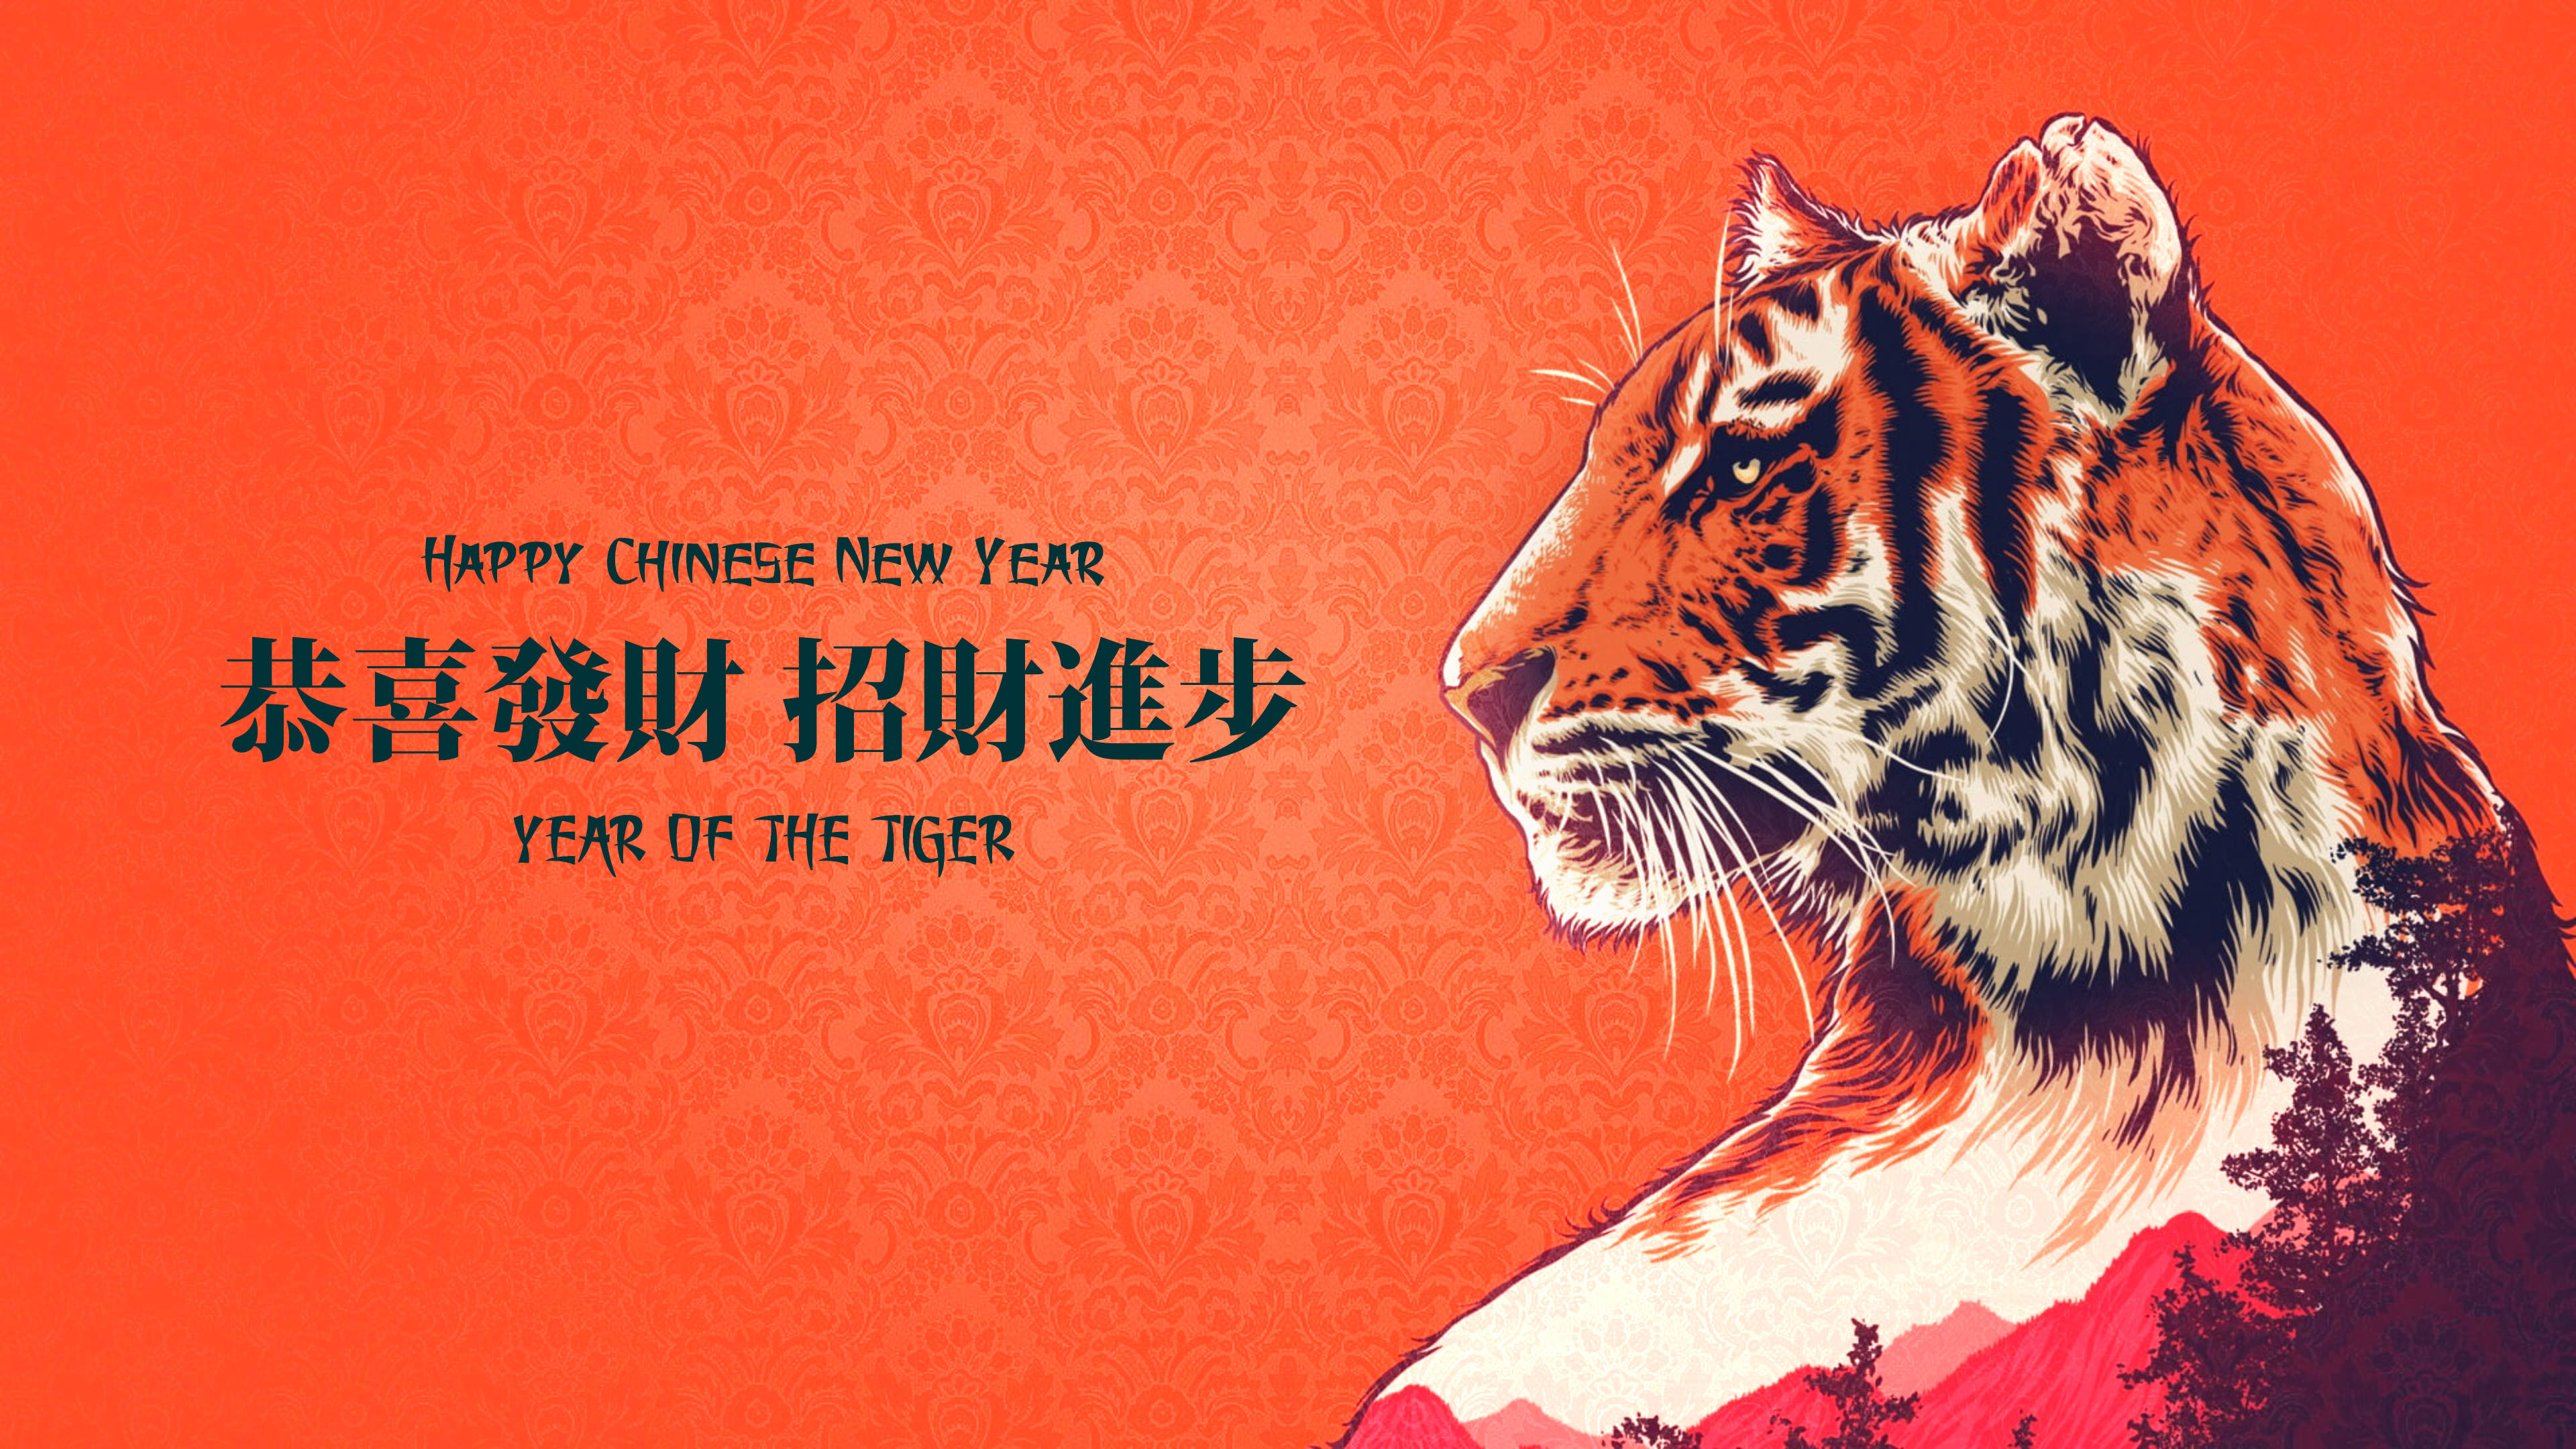 Download Chinese New Year Festive Tiger Wallpaper 